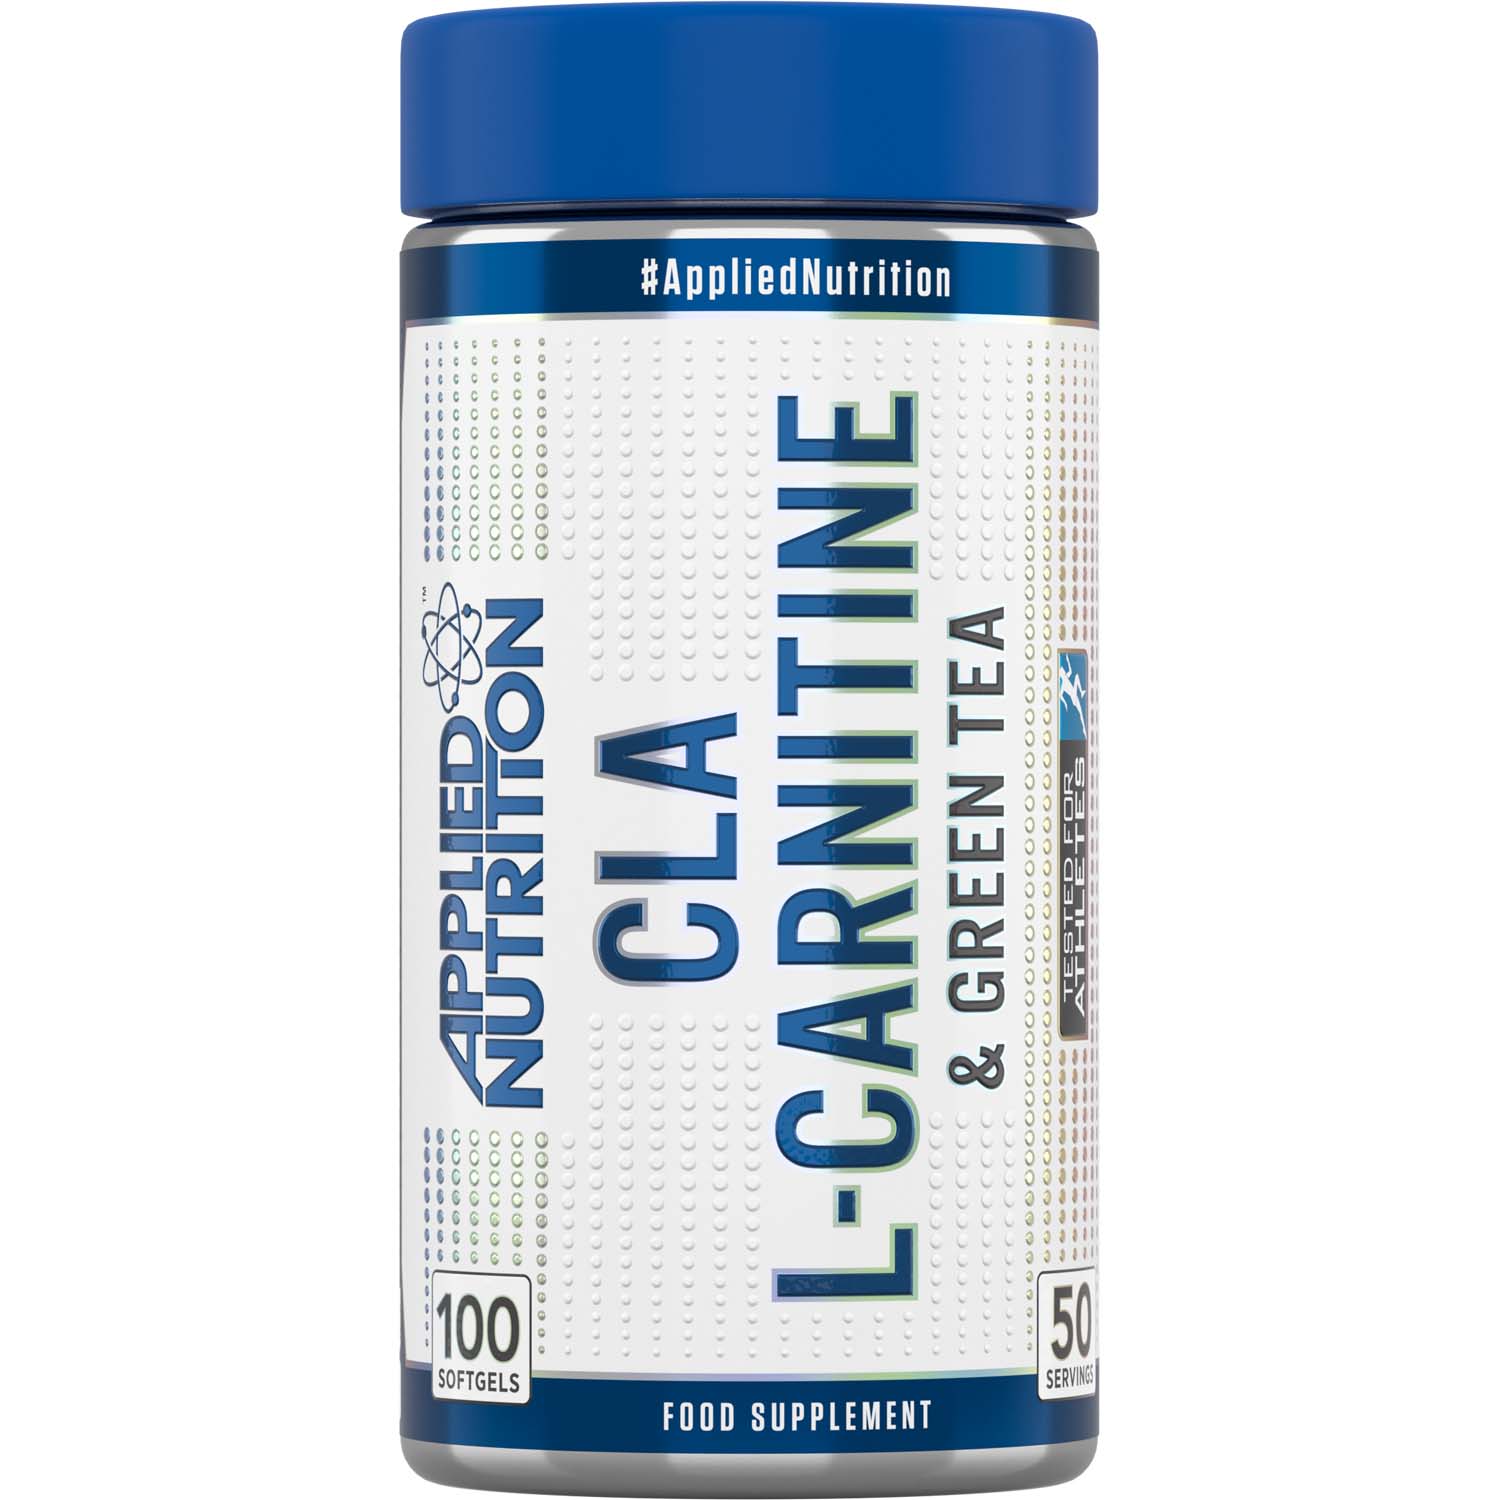 Applied Nutrition CLA L Carnitine and Green Tea 100 Softgels